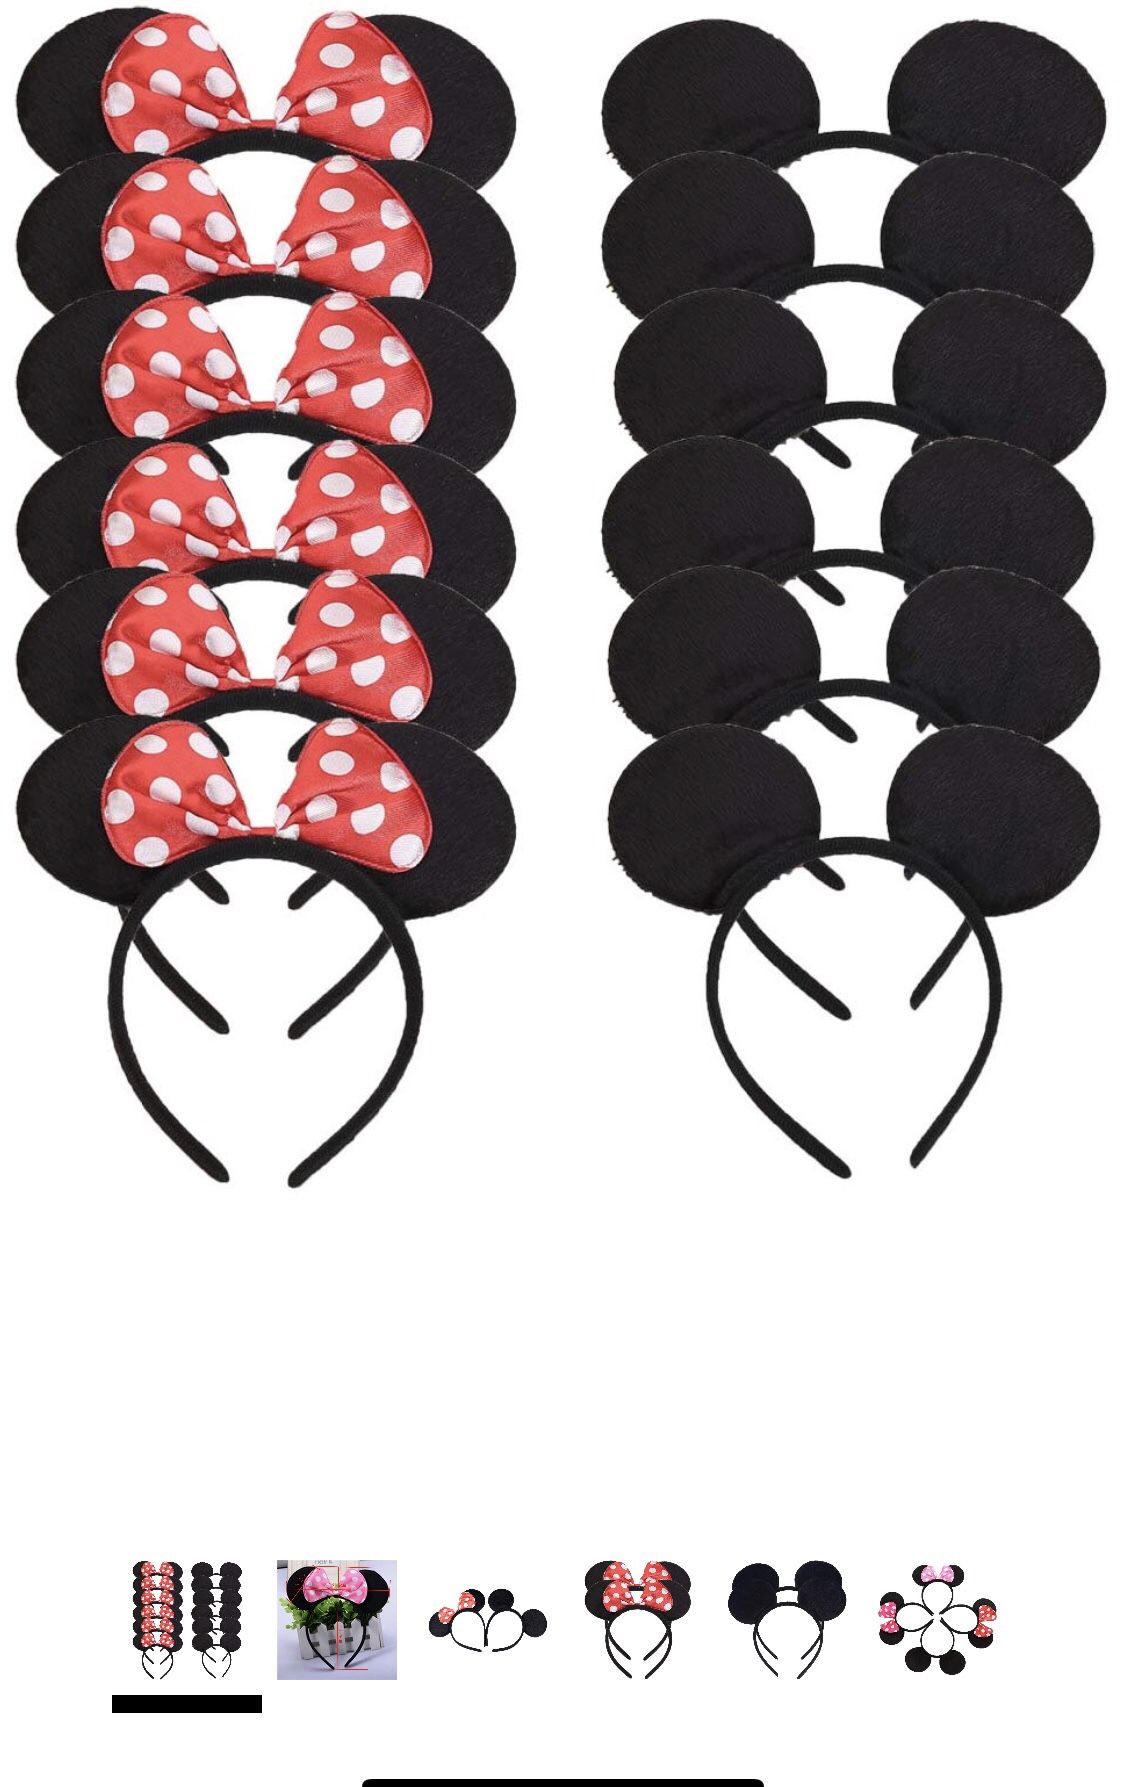 15 Mickey and 6 Minnie Mouse ears